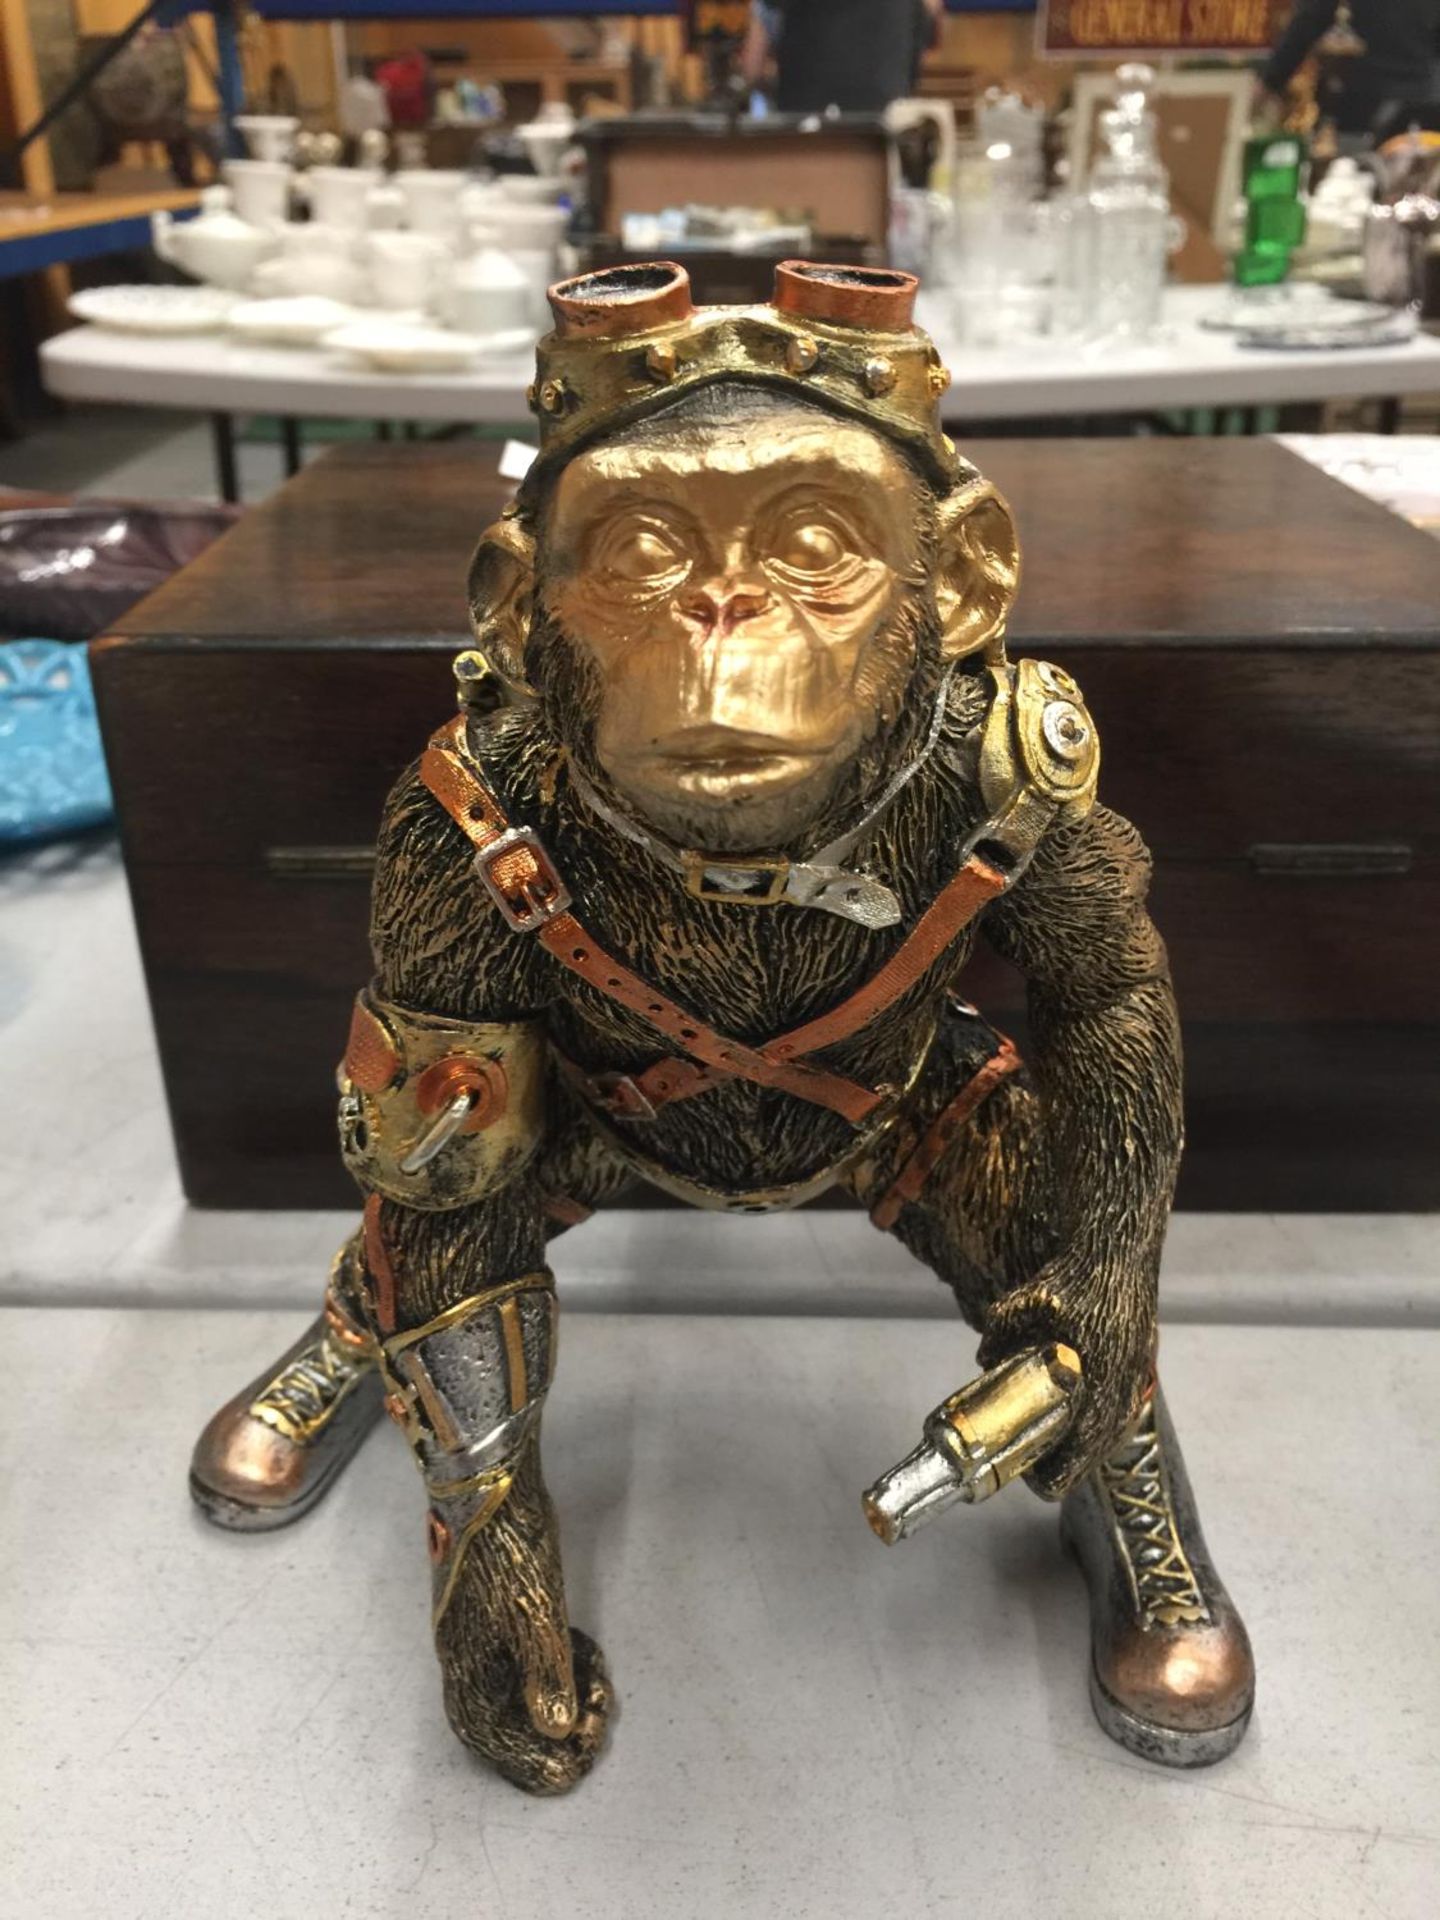 A STEAM PUNK STYLE MONKEY HEIGHT APPROX 20CM